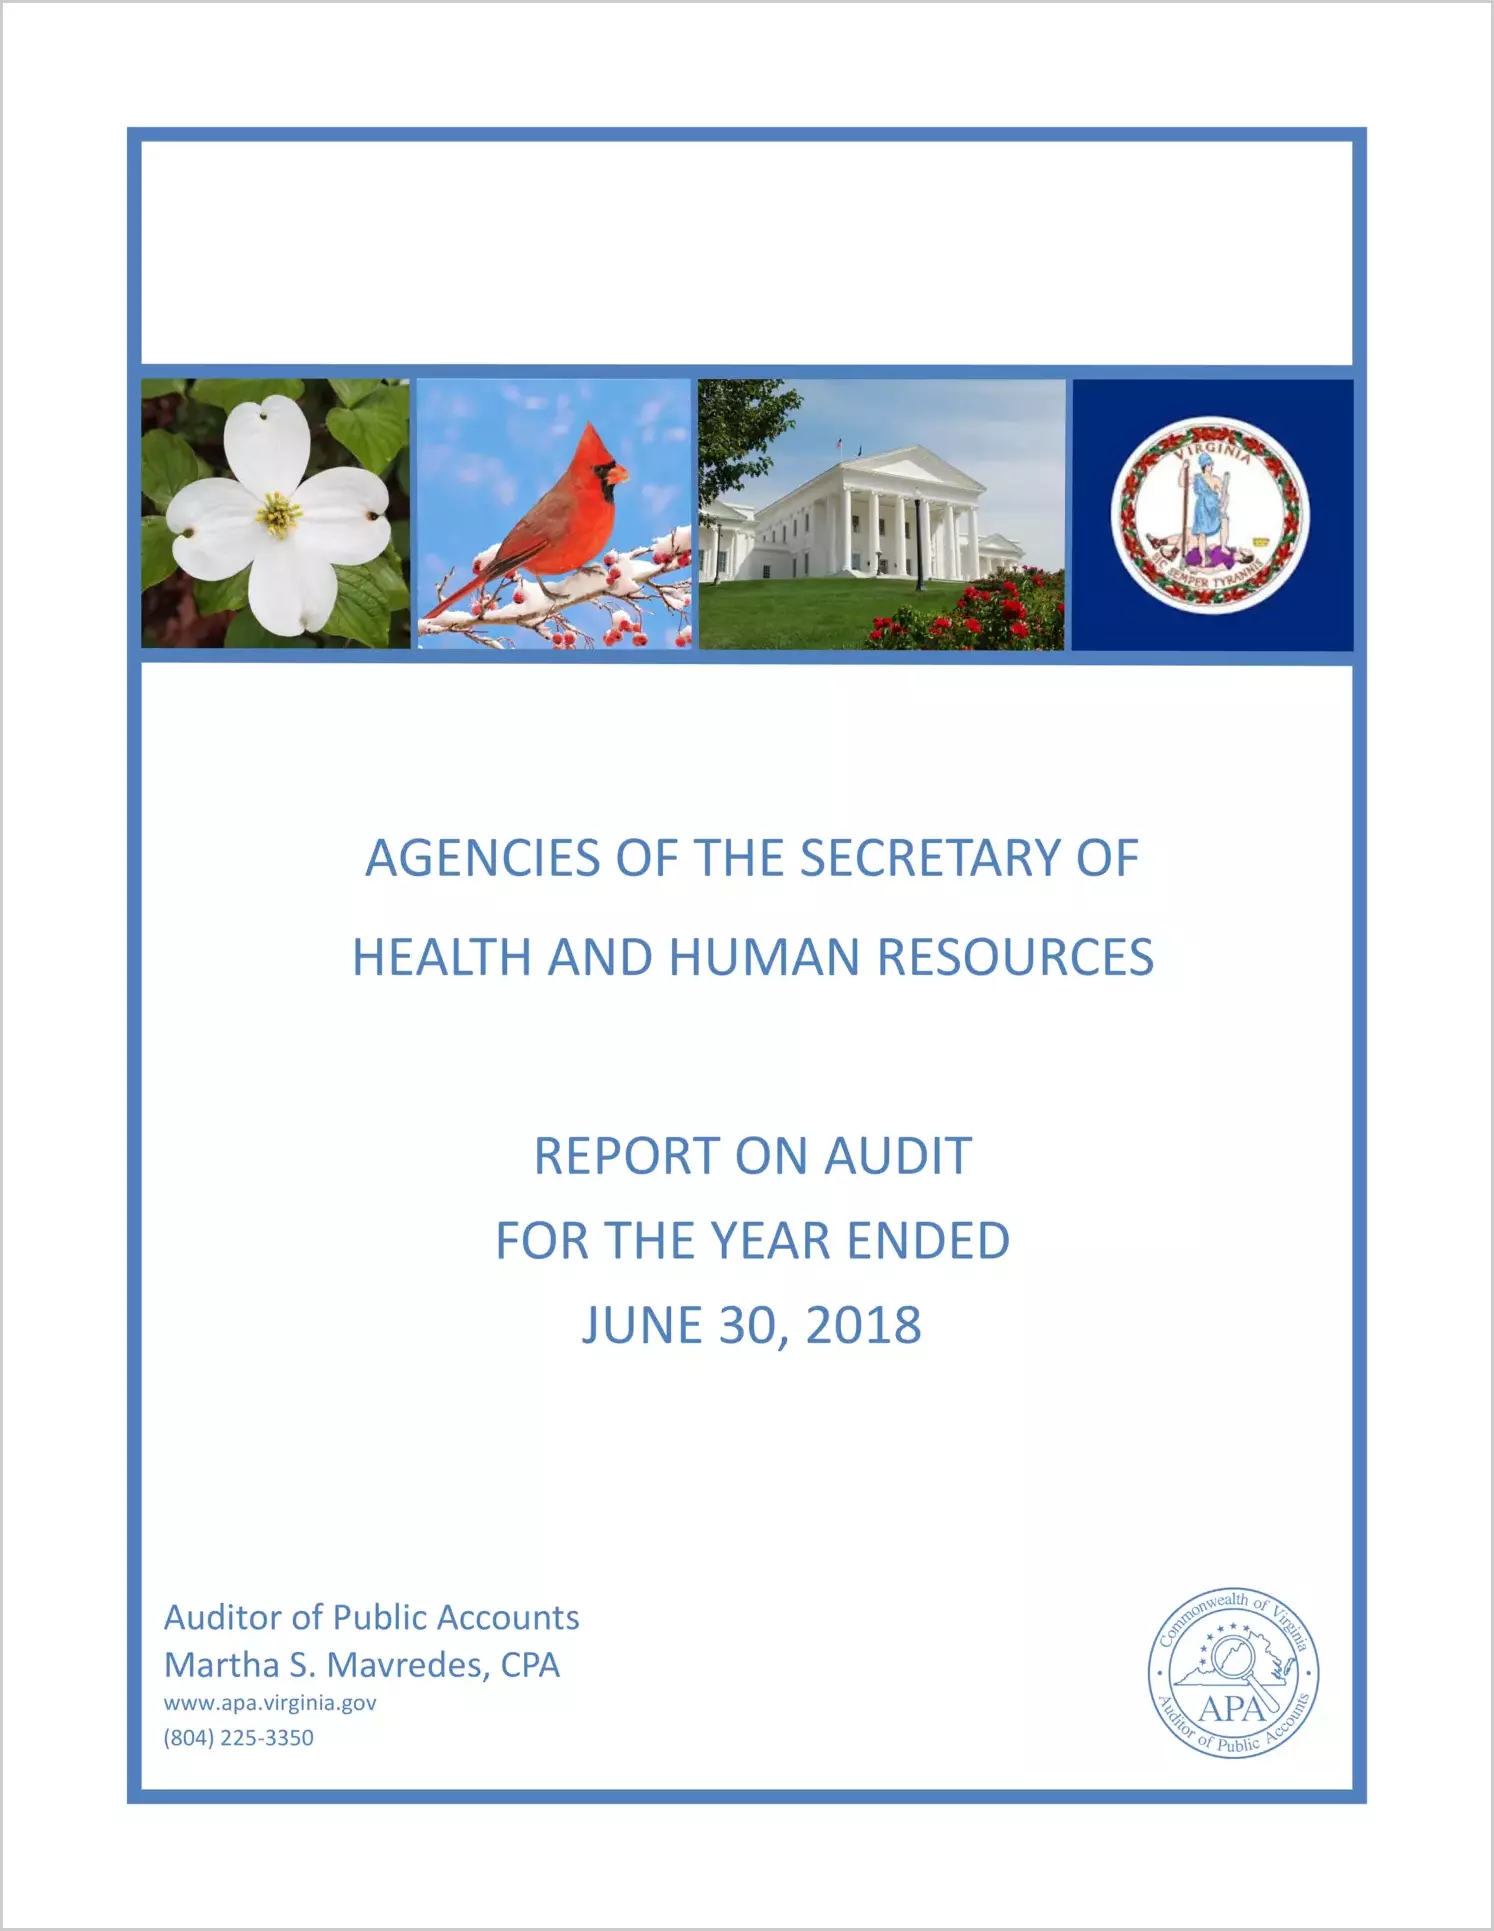 Agencies of the Secretary of Health and Human Resources for the year ended June 30, 2018